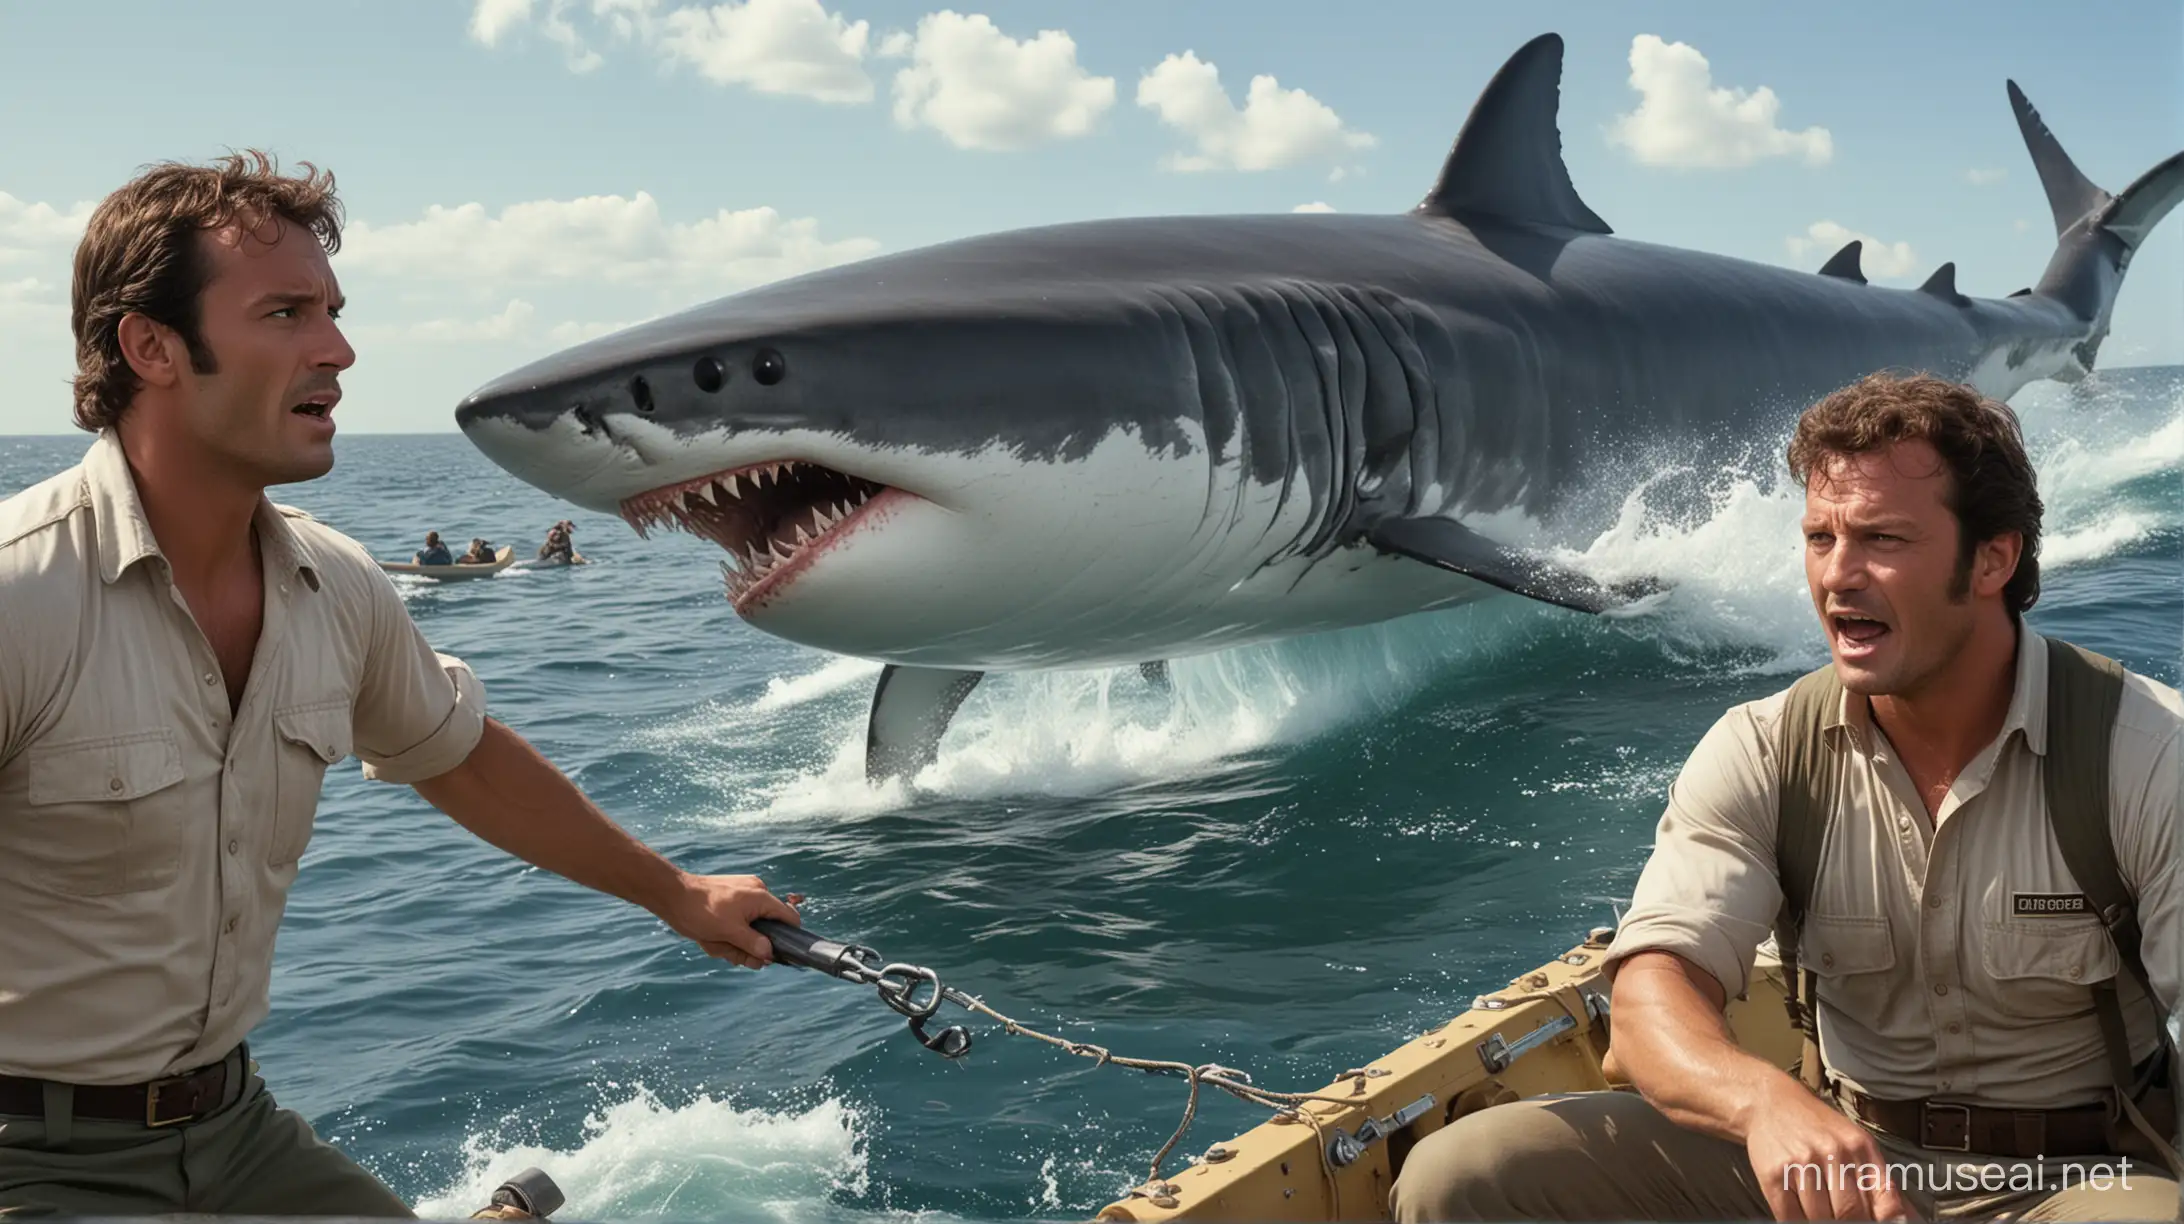 Depiction of an image of an original scene from the 1975 movie Jaws that takes place on Captain Quint’s Boat. In the image we see Quint, Chief Brodie and Matt Hooper in their efforts to kill The Great White Shark. It is daytime, there is much tension between the characters. Quint is trying to be authoritative, Hooper is defiant,  Brodie trying to keep everyone calm. 